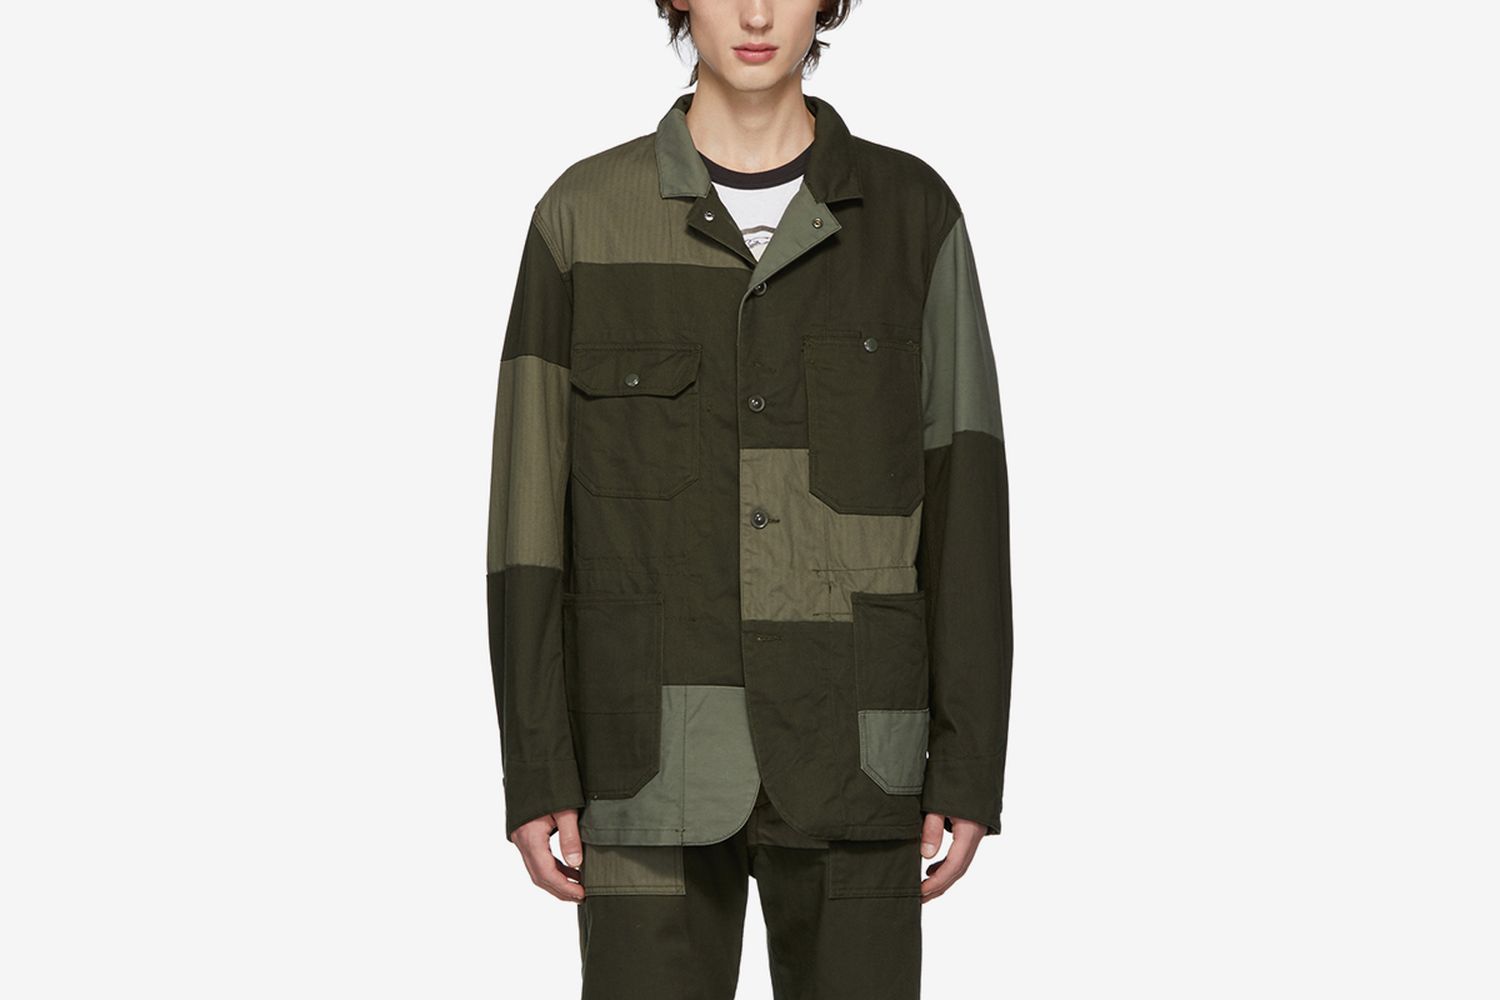 Cop the Engineered Garments FW19 Collection at SSENSE